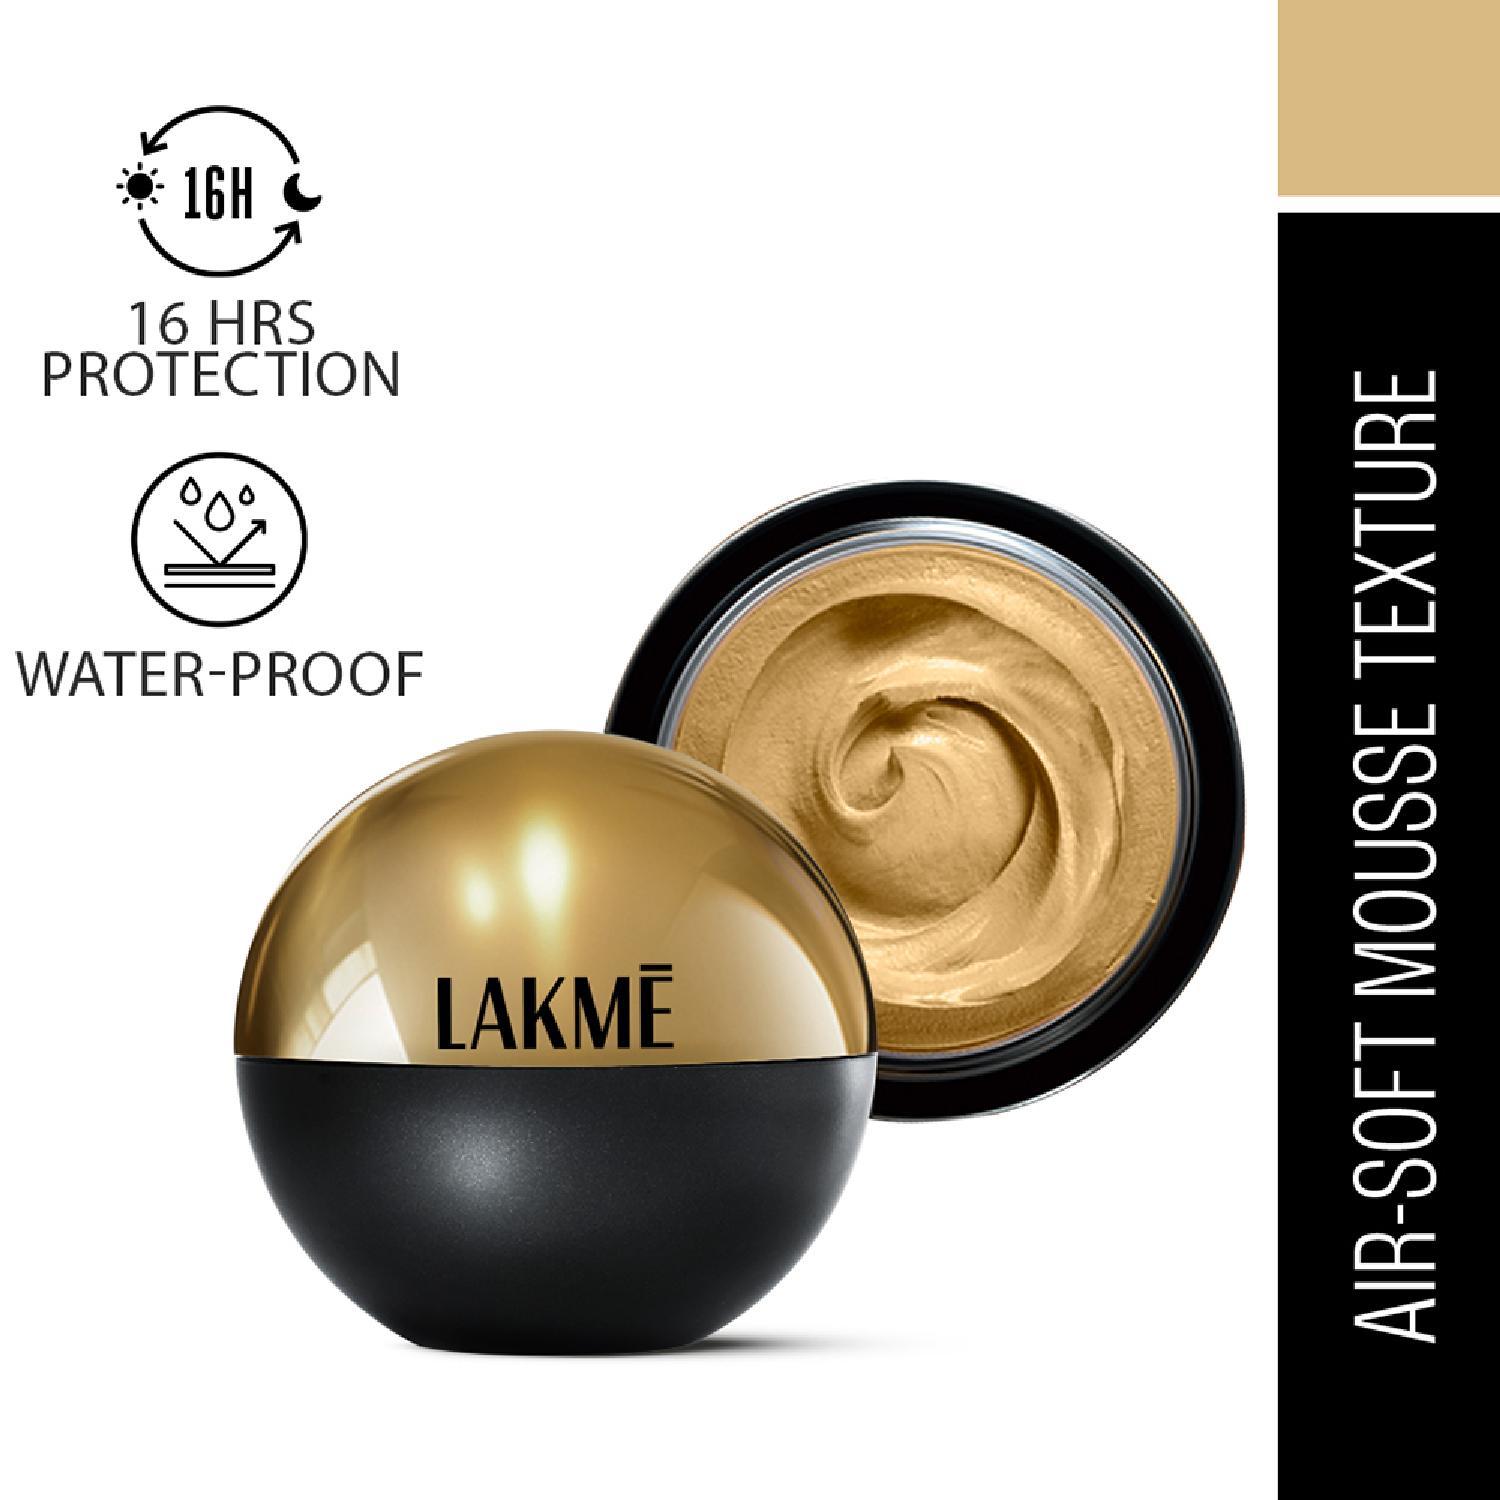 Lakme | Lakme Xtraordin-airy Mattereal Mousse Foundation, 01 Classic Ivory (25 g)